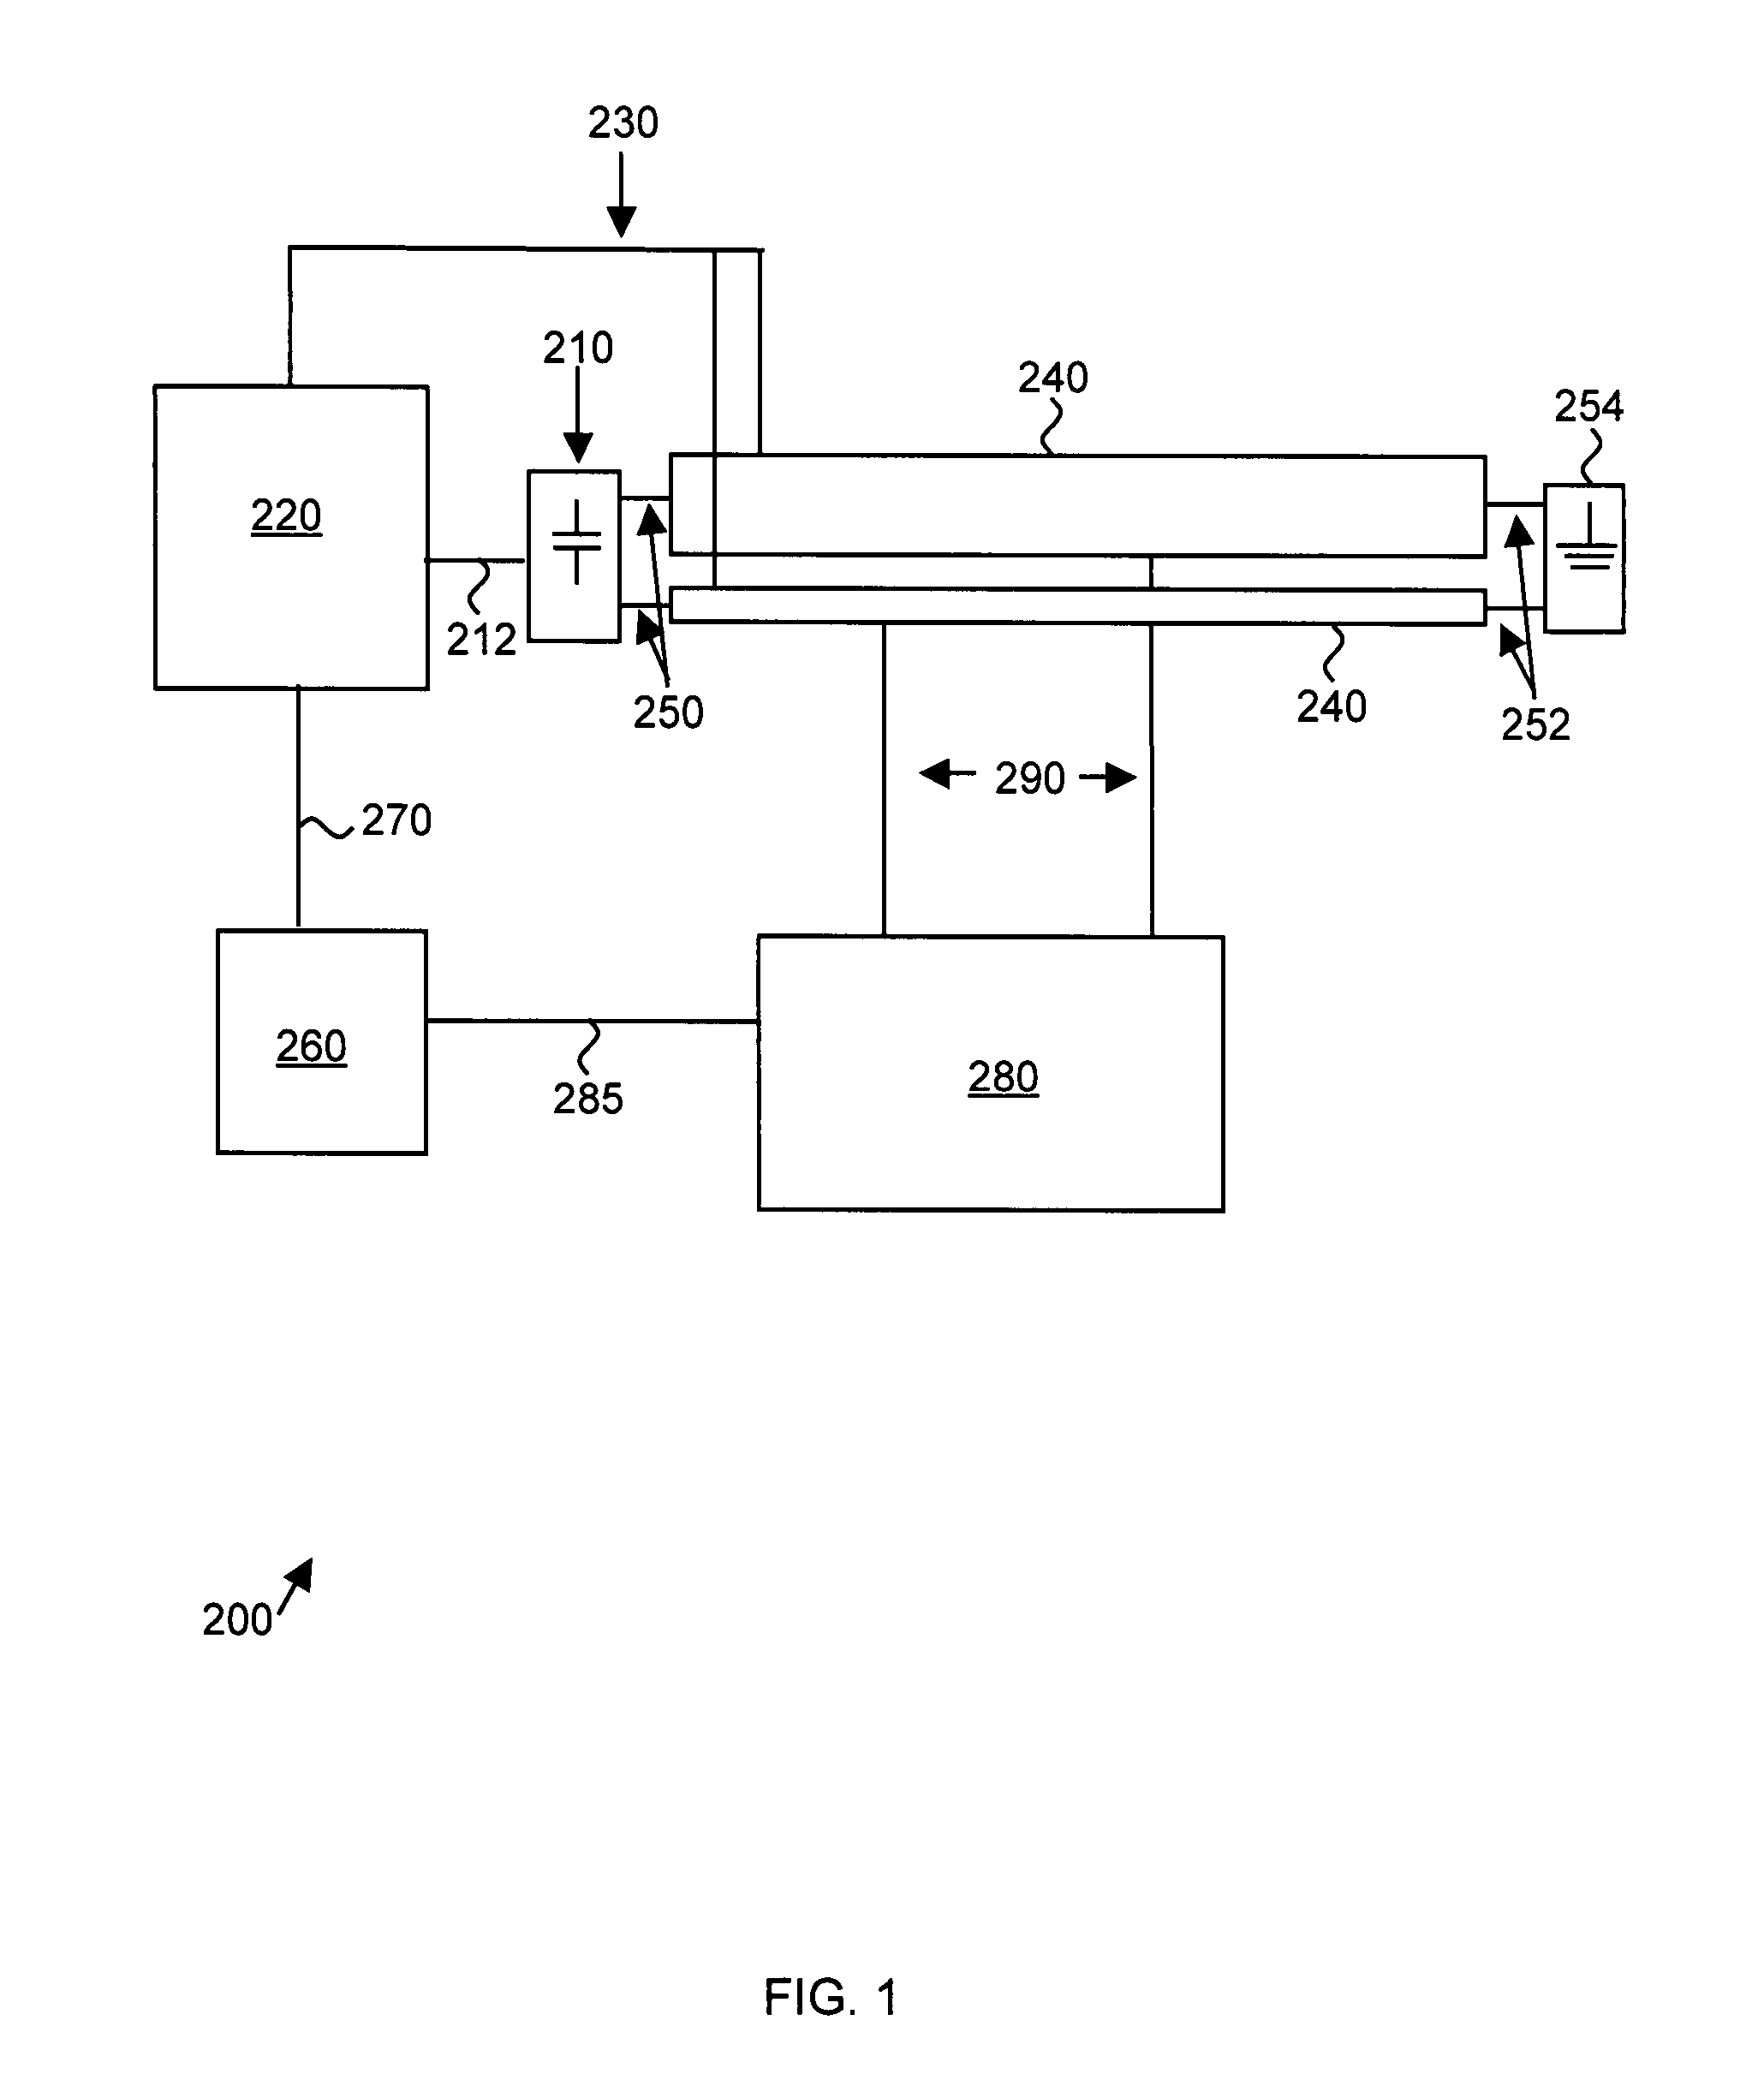 Circuit for charging a capacitor with a power source